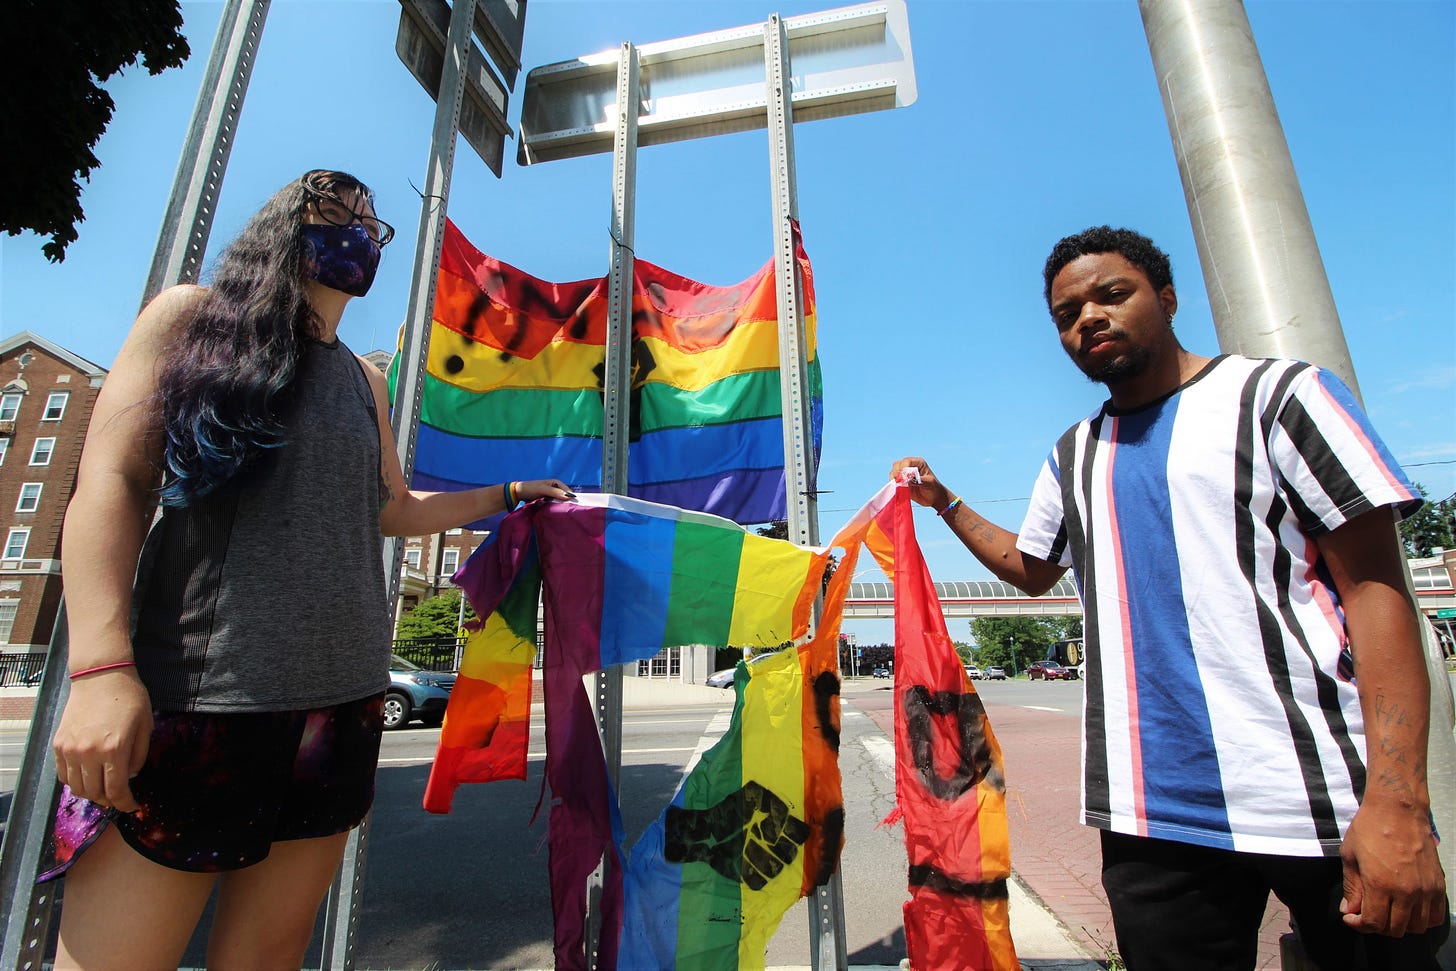 BLM LGBTQ+ activists: keep tearing down our flag at Gateway Plaza, we’ll replace it